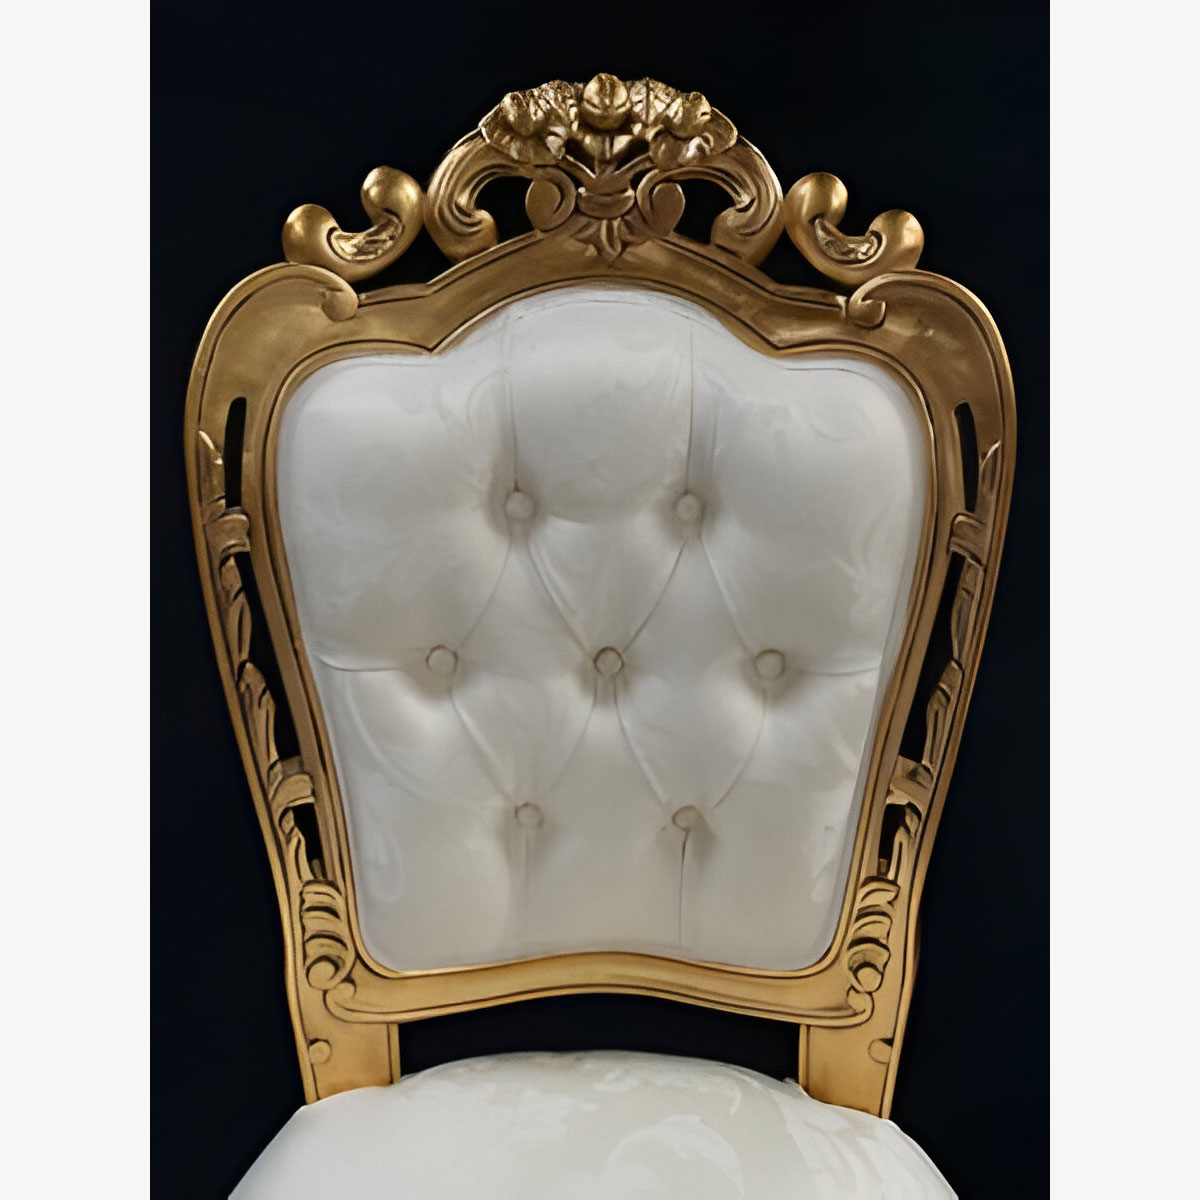 Franciscan Chair In Gilded Gold And Ivory Cream Dining Or Occasional 2 - Hampshire Barn Interiors - Franciscan Chair In Gilded Gold And Ivory Cream (Dining Or Occasional) -